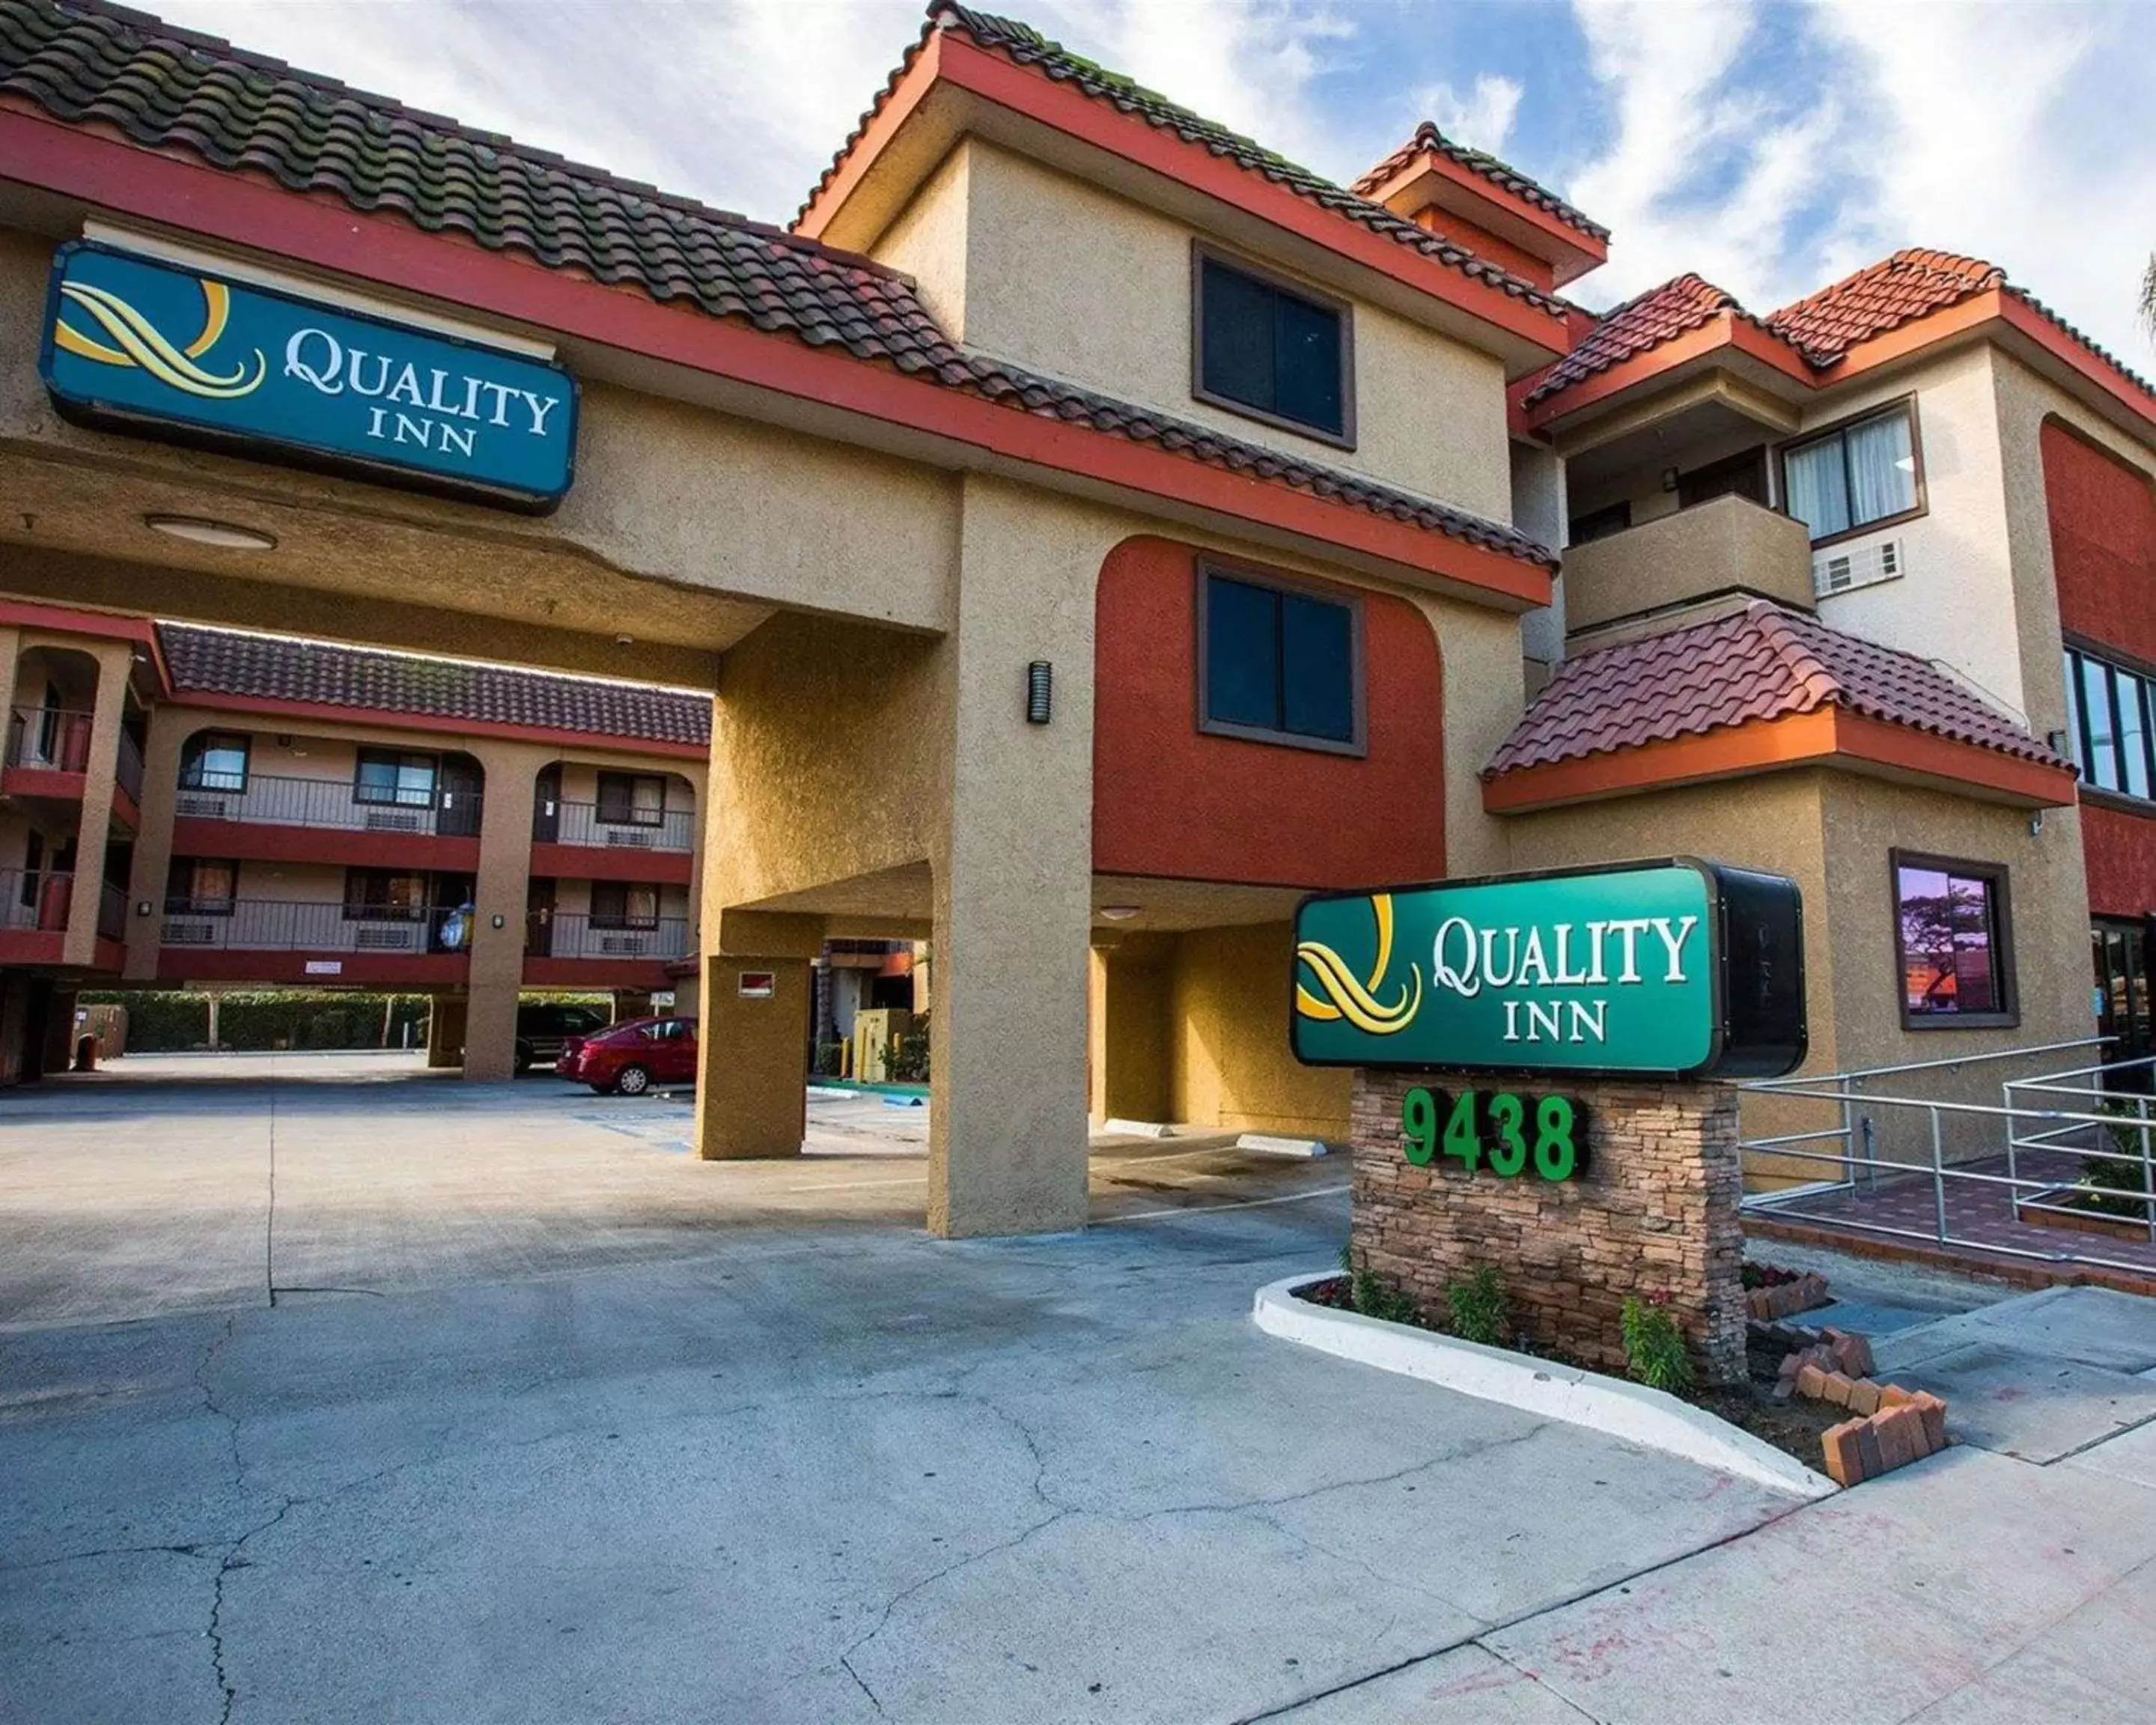 Property Building in Quality Inn Downey